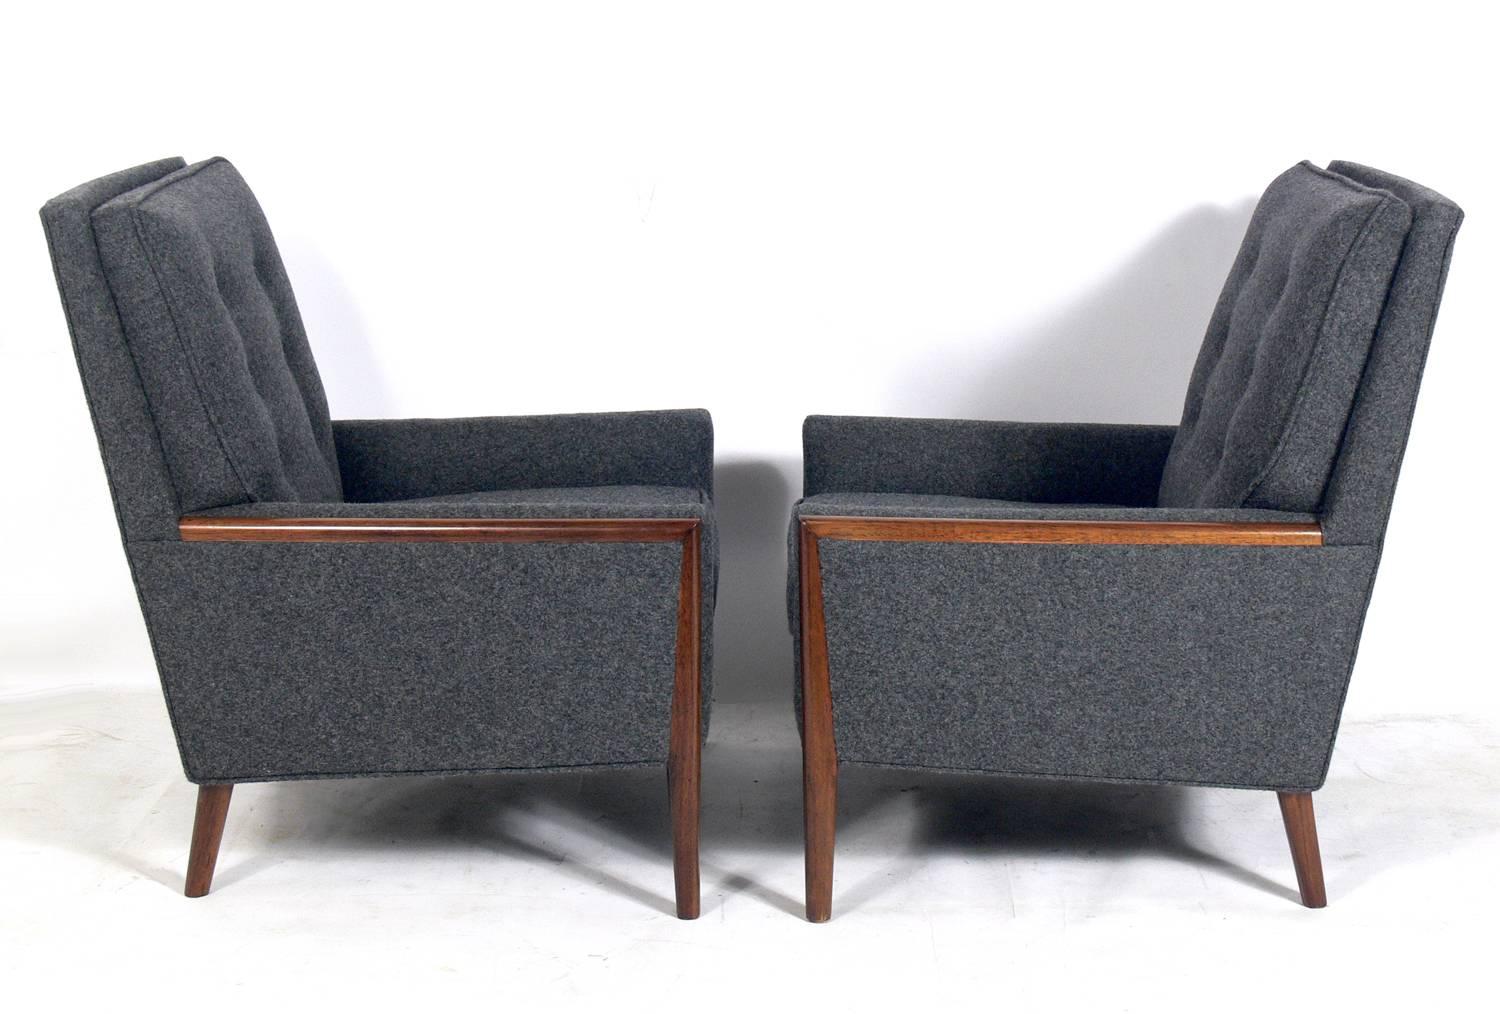 Pair of modern lounge chairs, in the style of T.H. Robsjohn-Gibbings, American, circa 1960s. They have been reupholstered in a charcoal gray upholstery and the walnut trim has been cleaned and oiled.